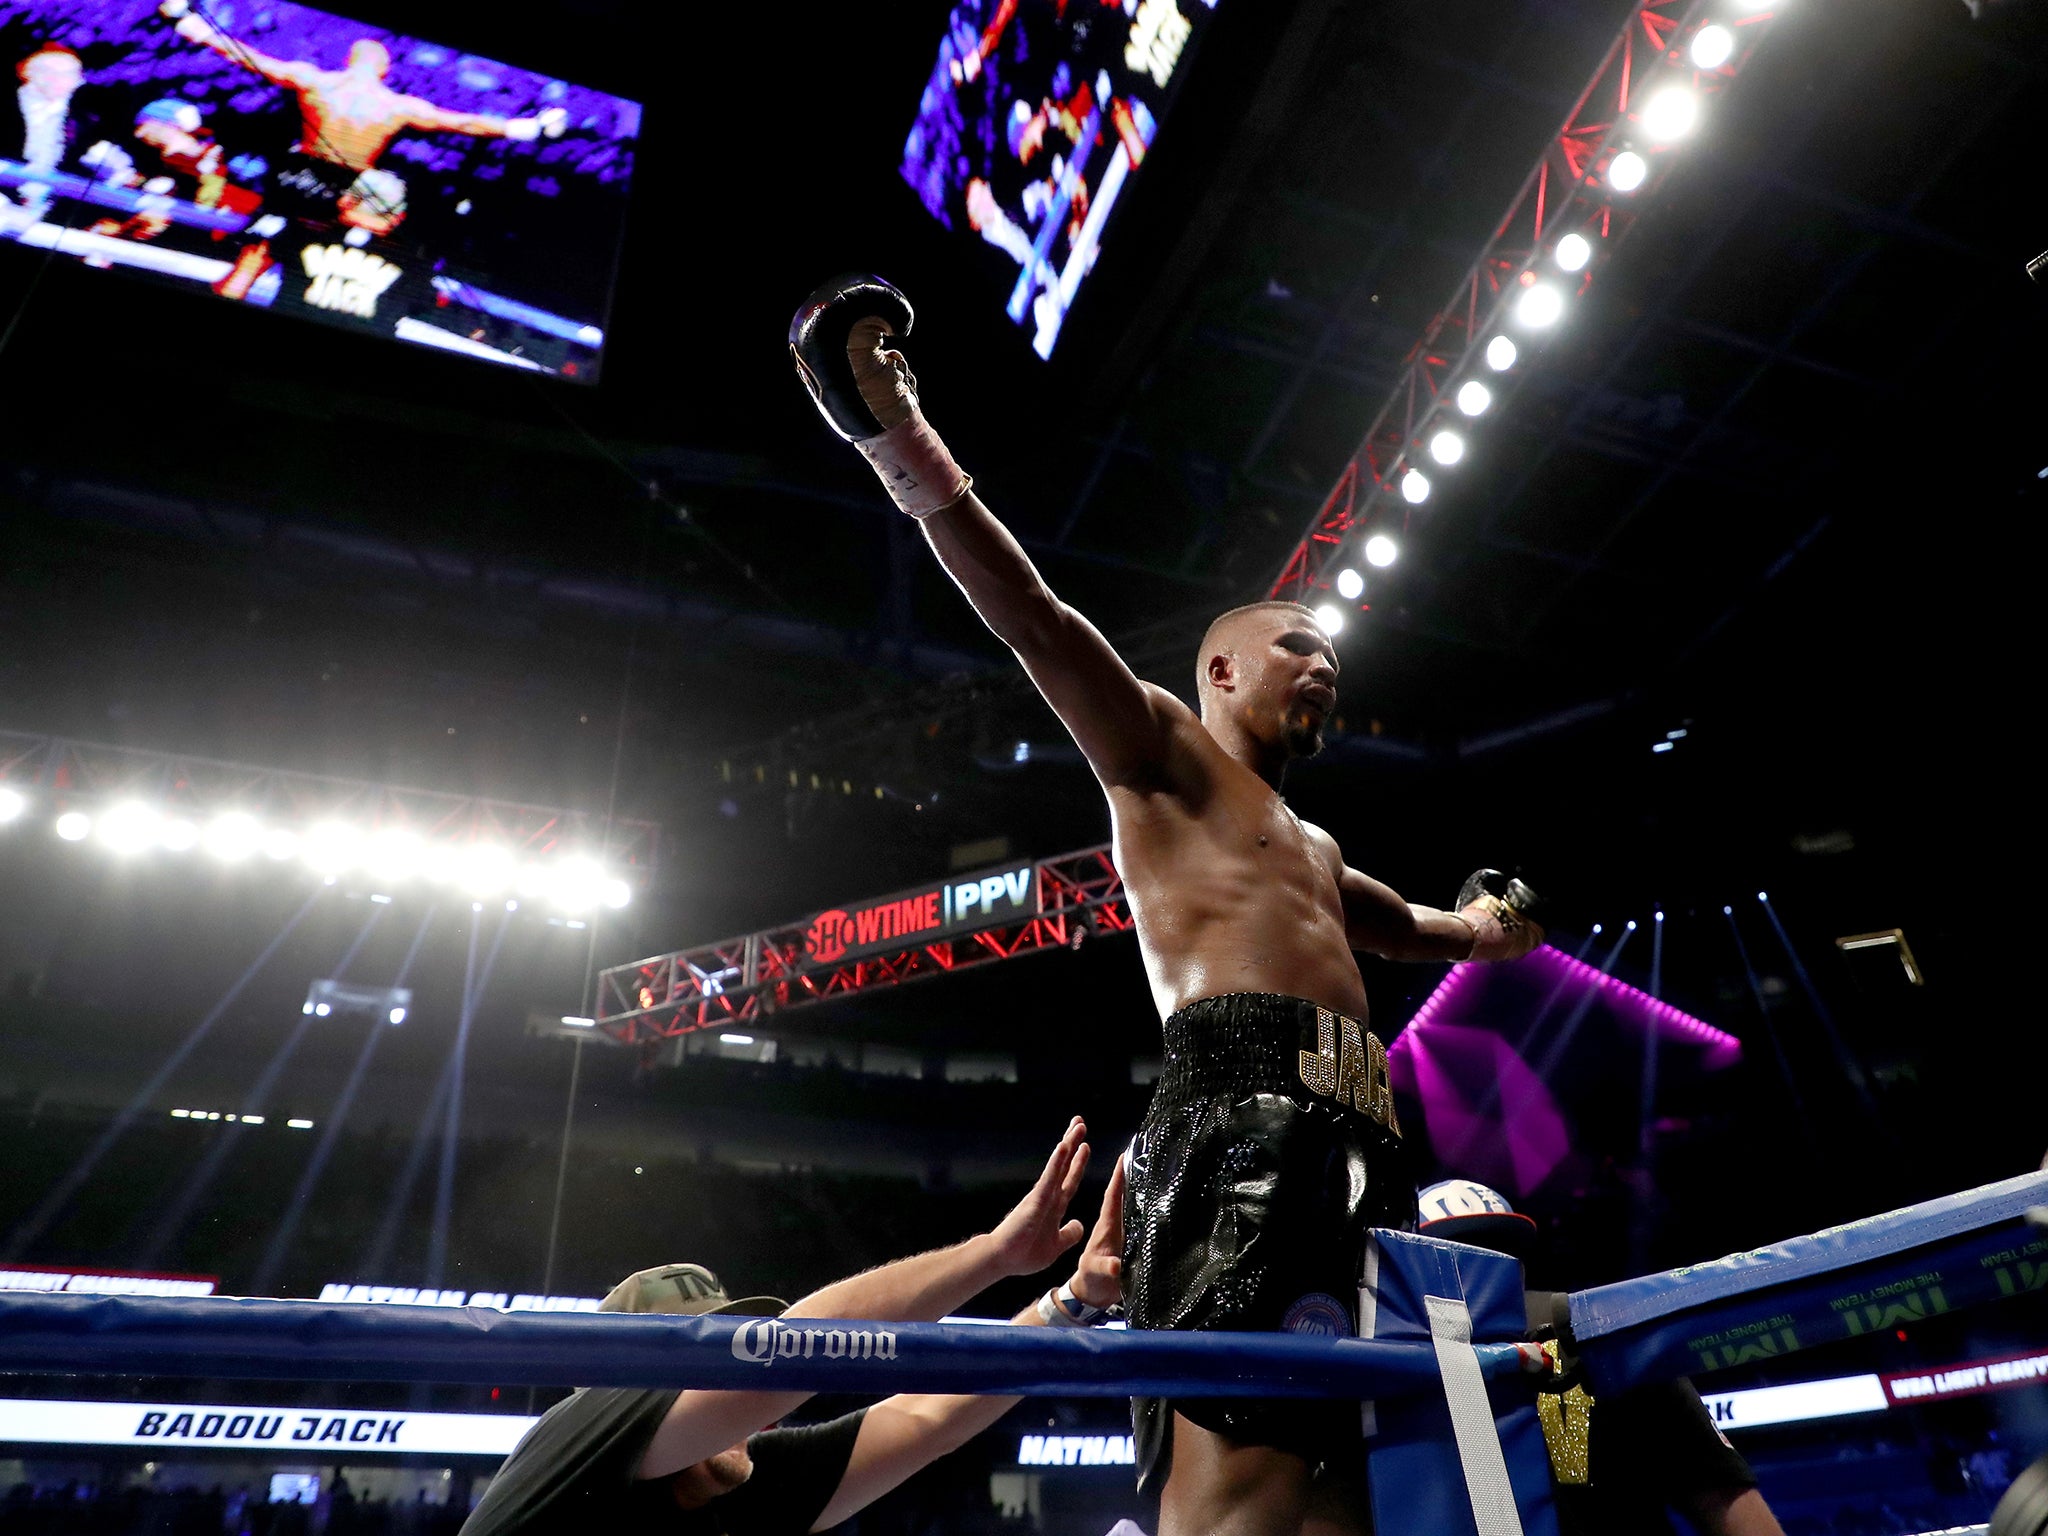 Badou Jack celebrates winning the WBA light-heavyweight title after defeating Nathan Cleverly